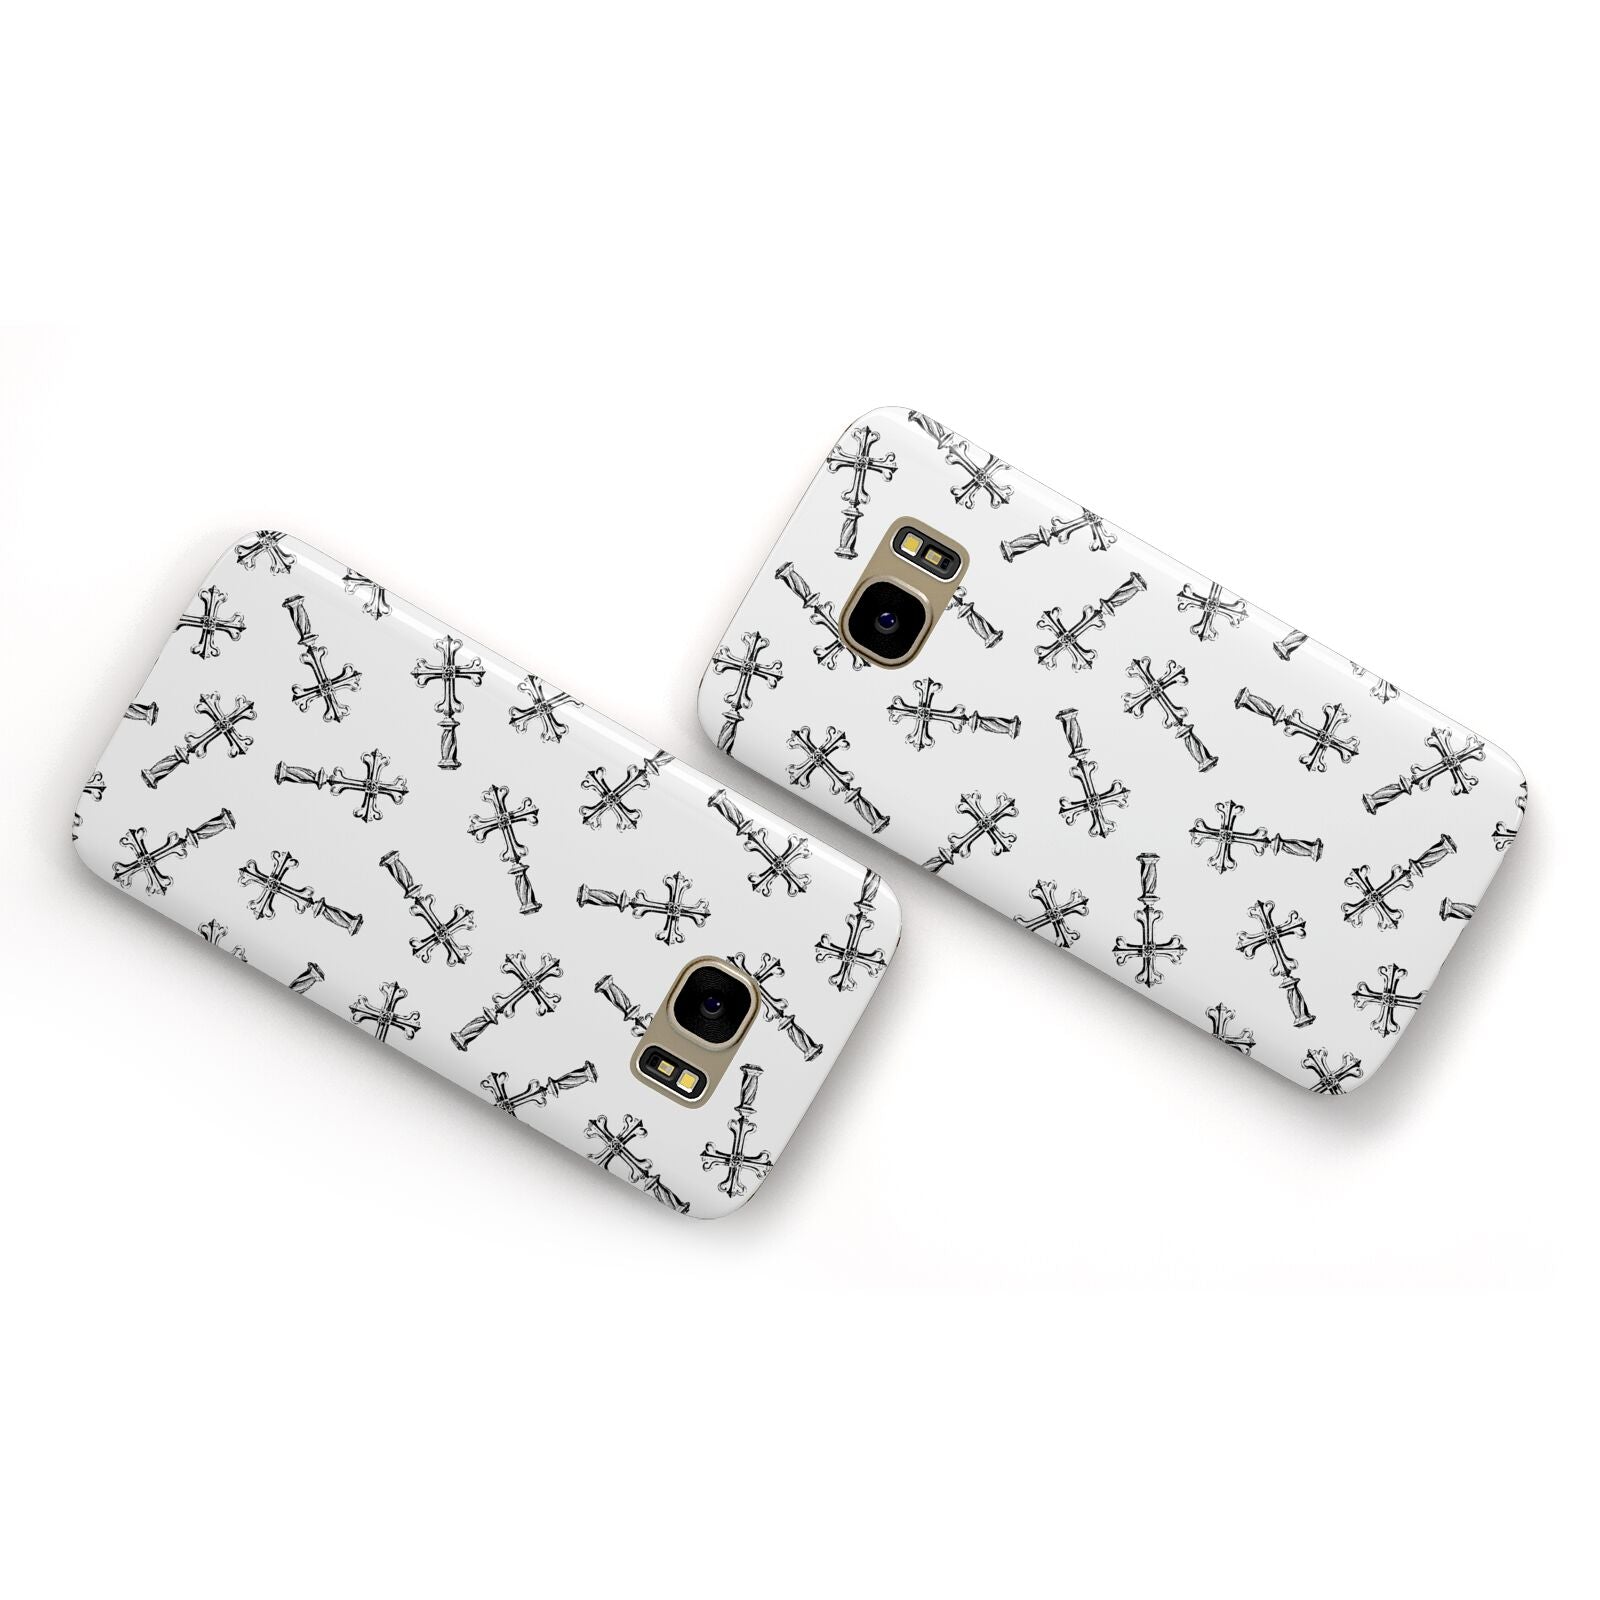 Monochrome Crosses Samsung Galaxy Case Flat Overview